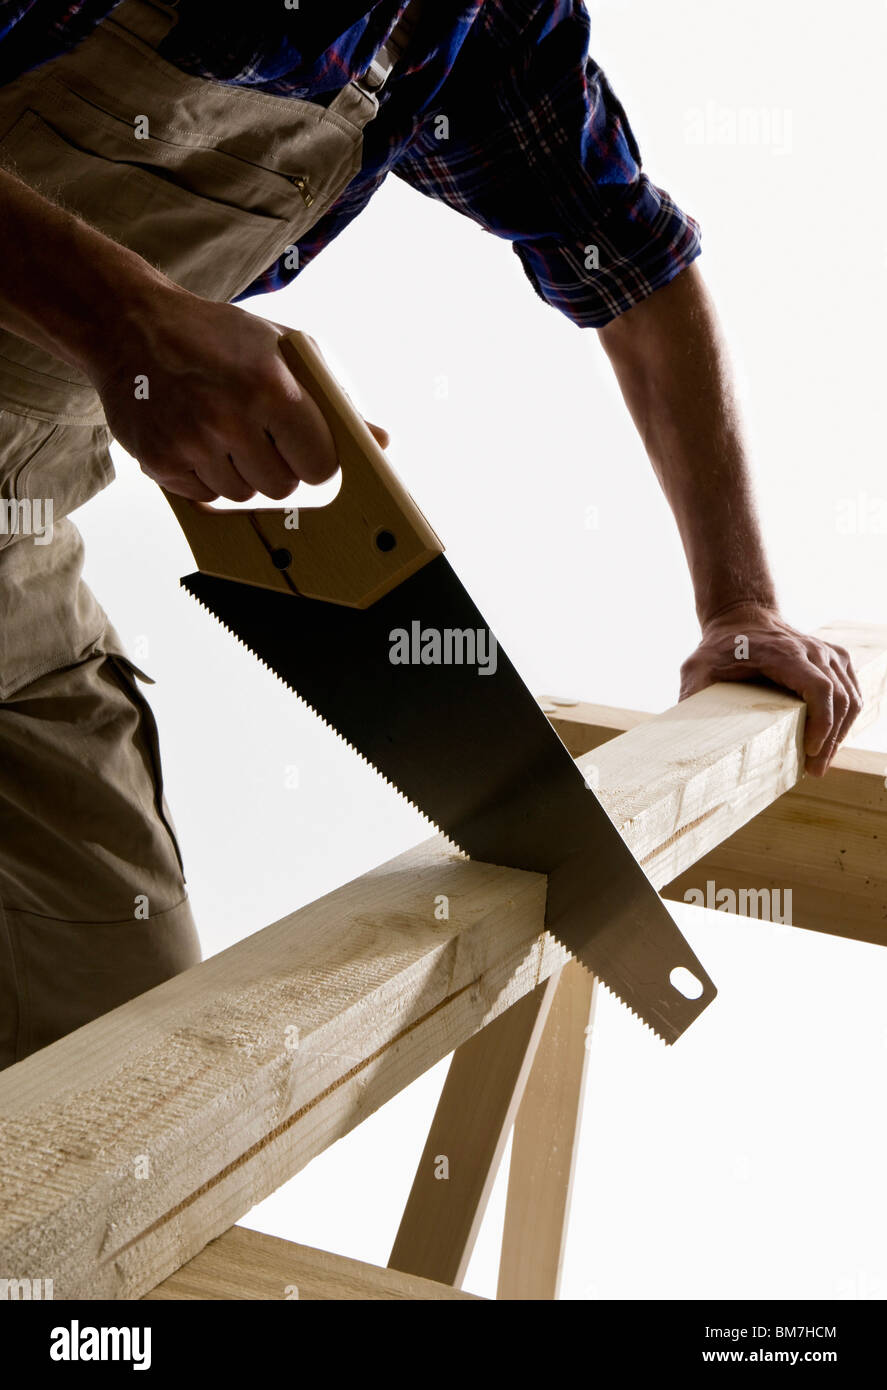 A carpenter sawing a wooden plank, focus on saw Stock Photo